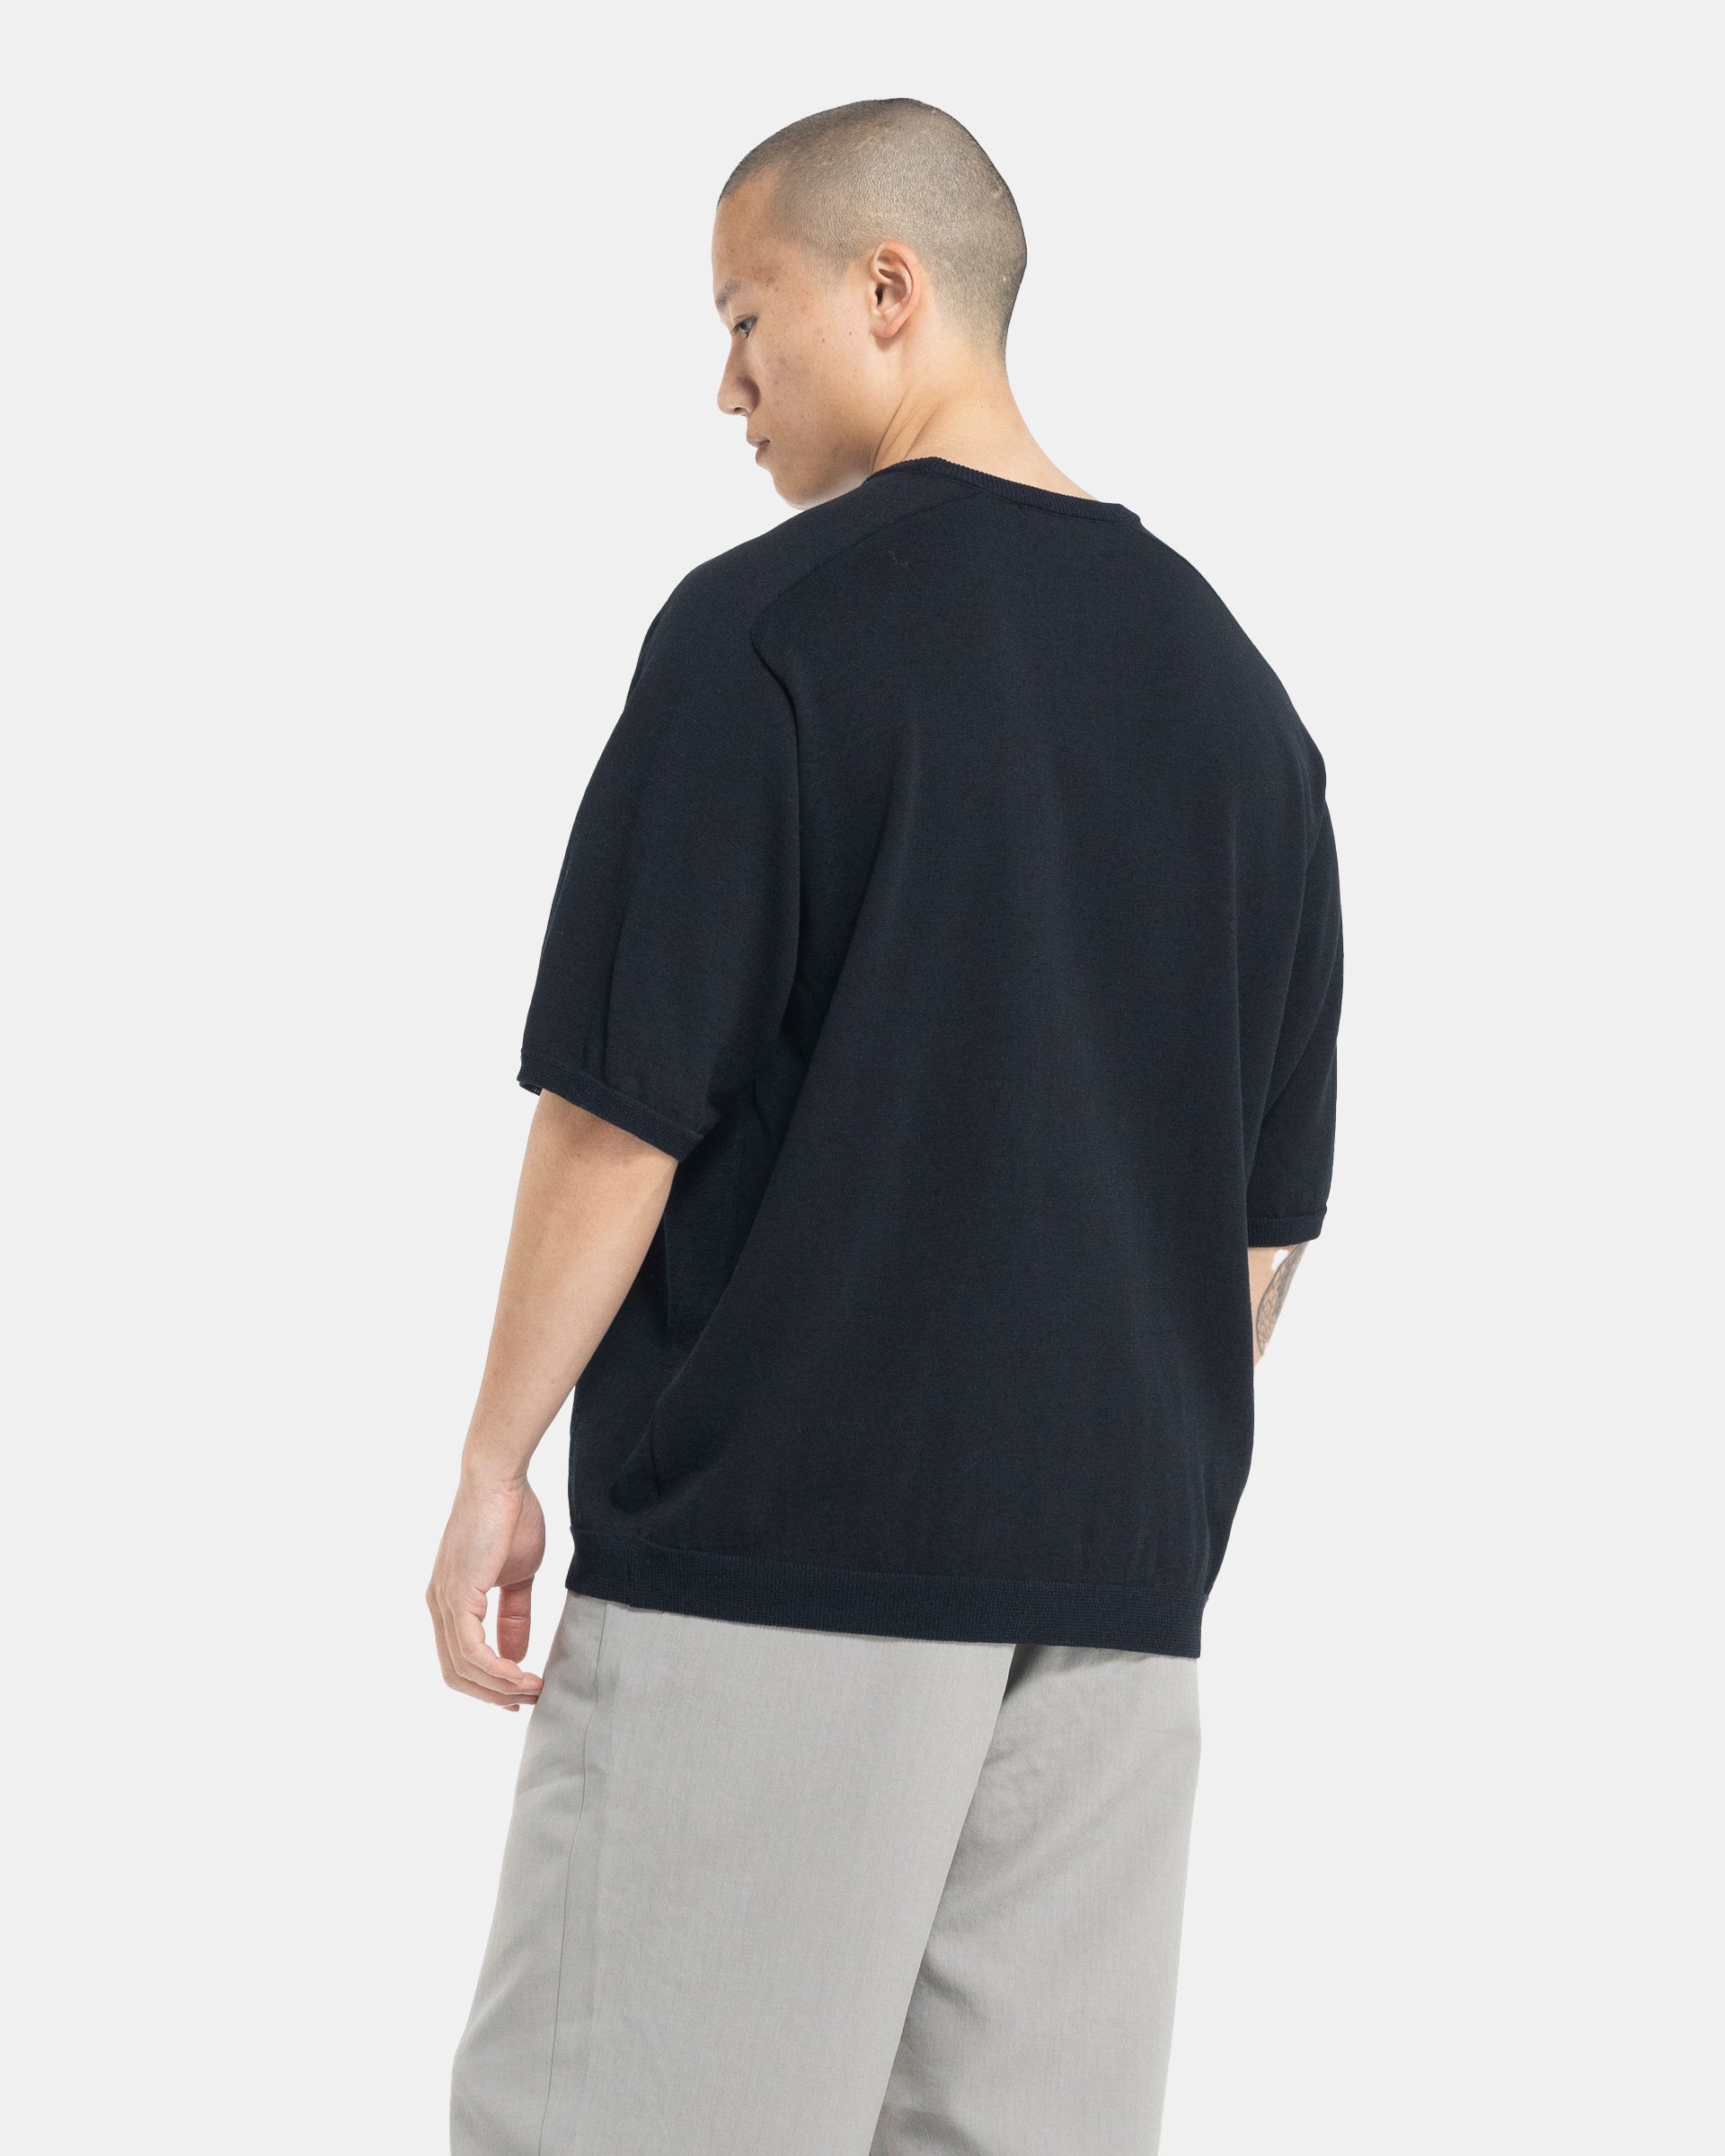 Male model wearing black Still By Hand knit T-shirt on white background